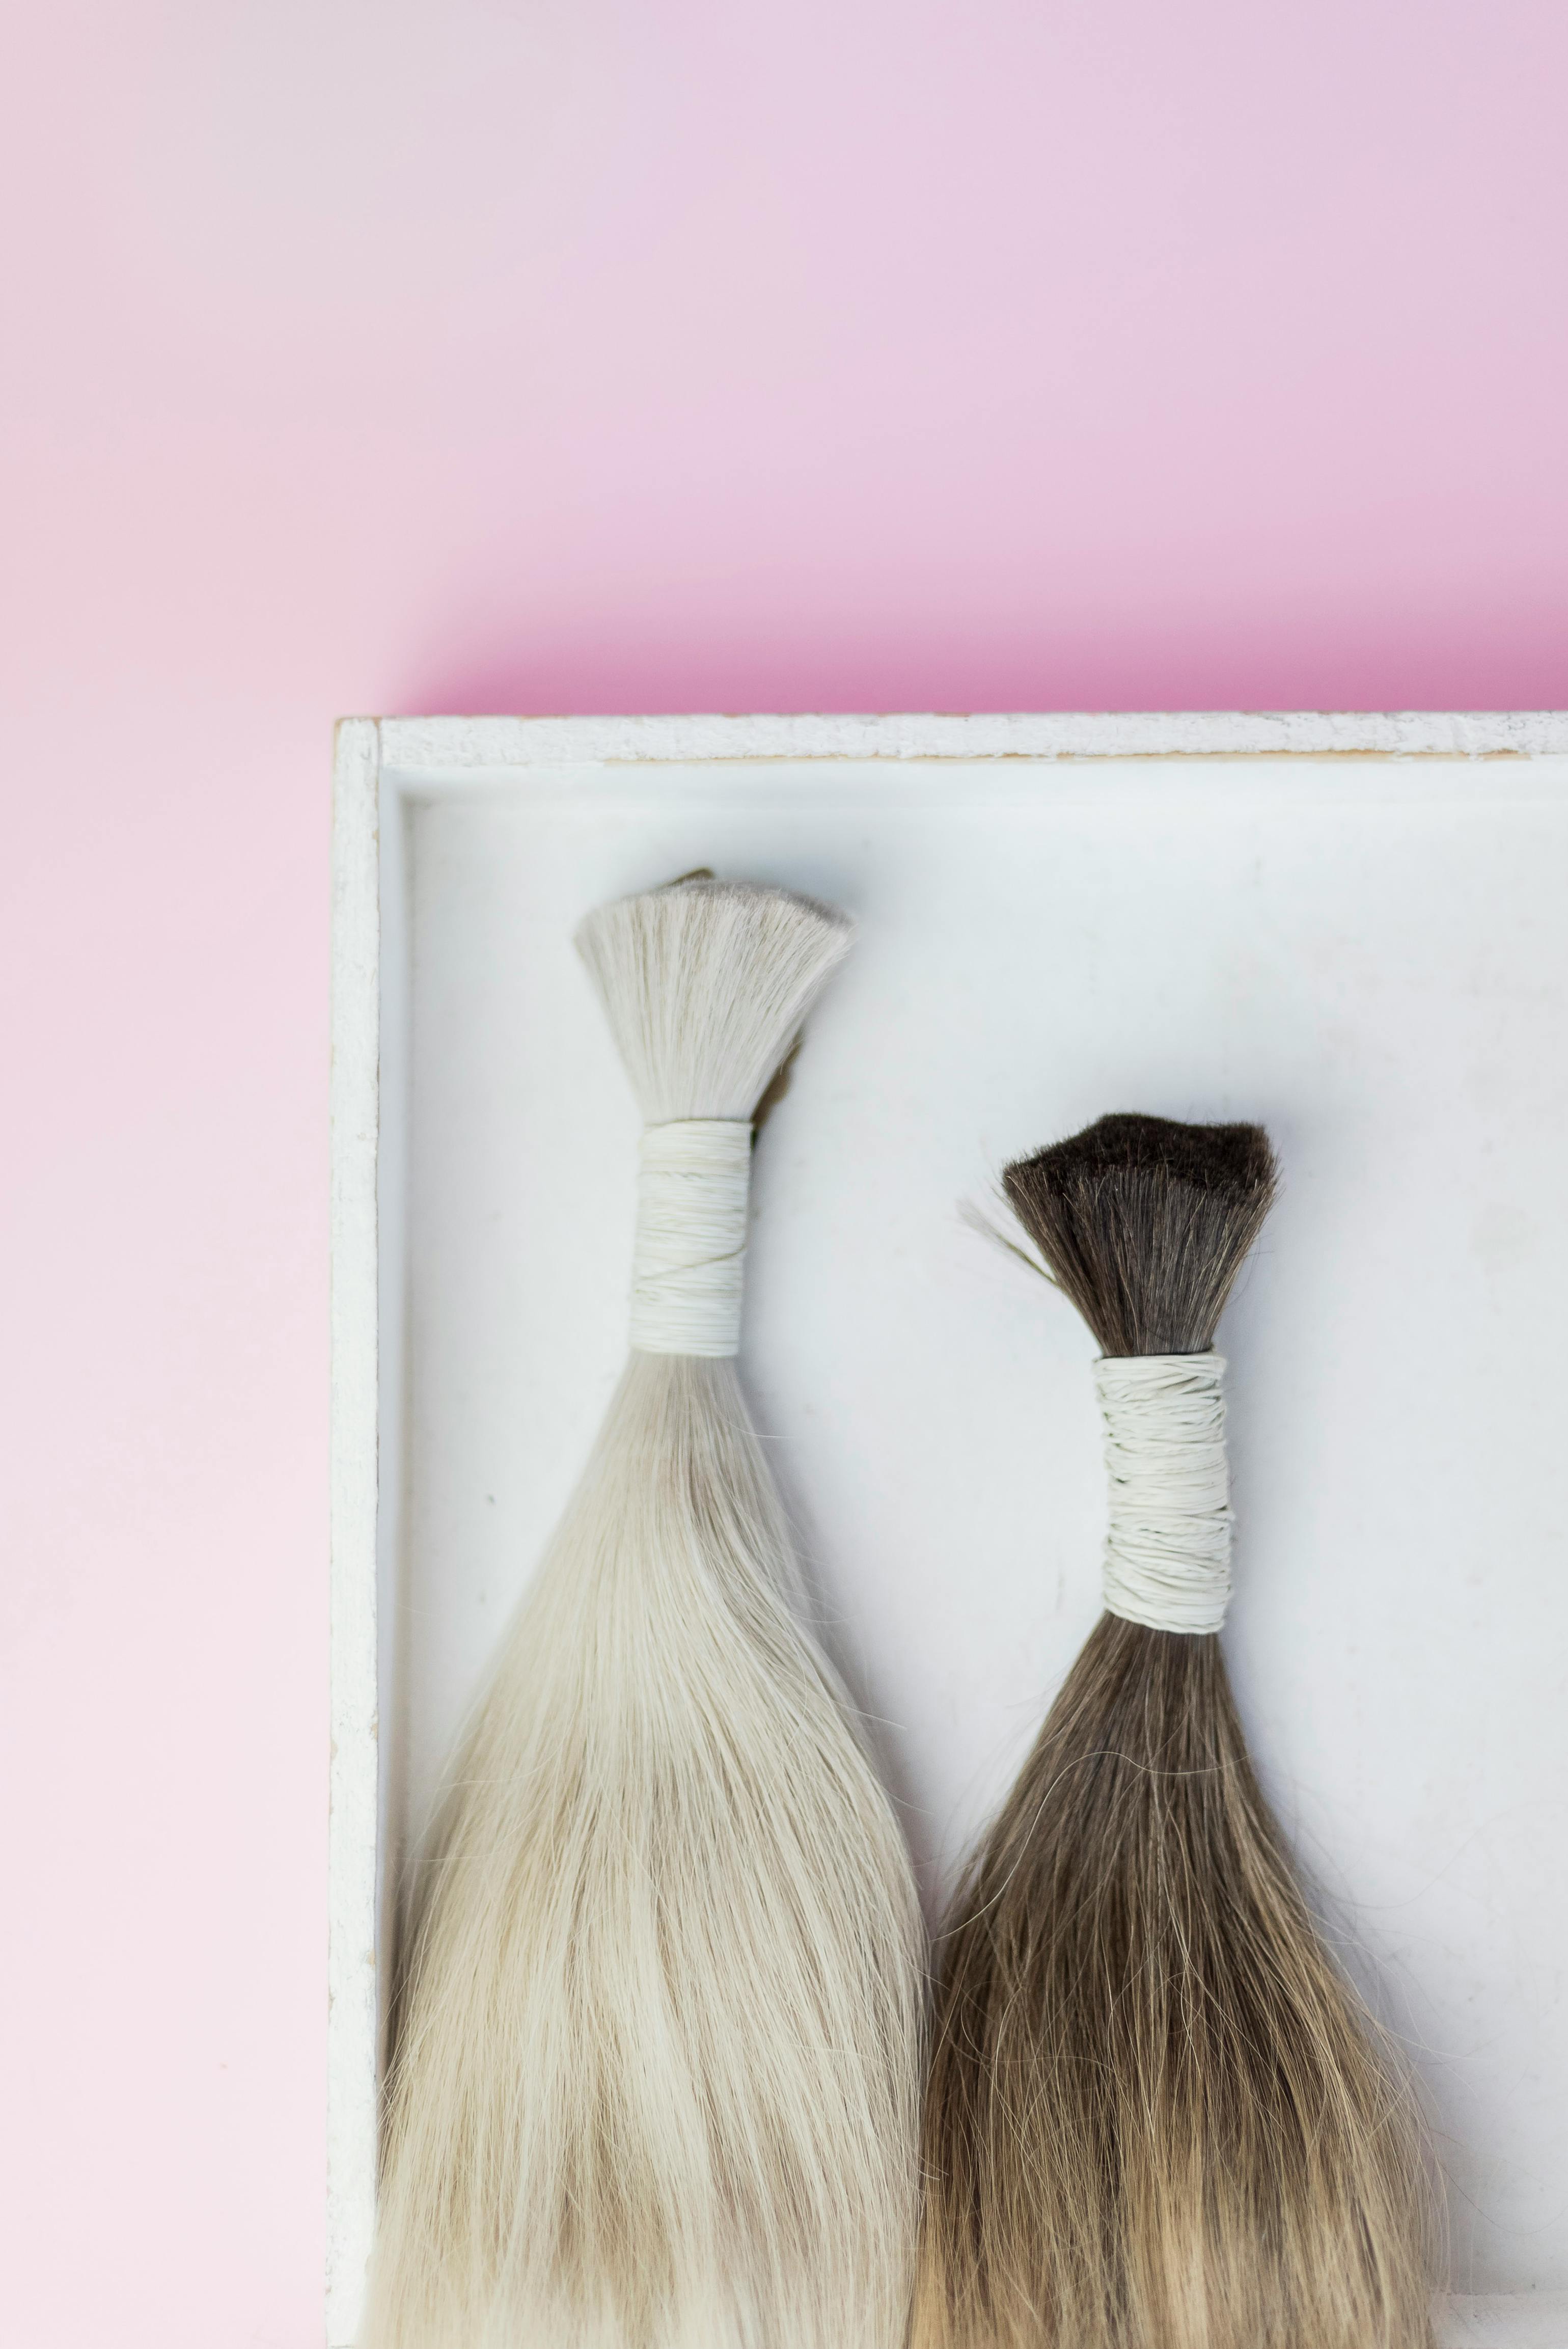 For illustration purposes only. Hair extentions | Source: Pexels